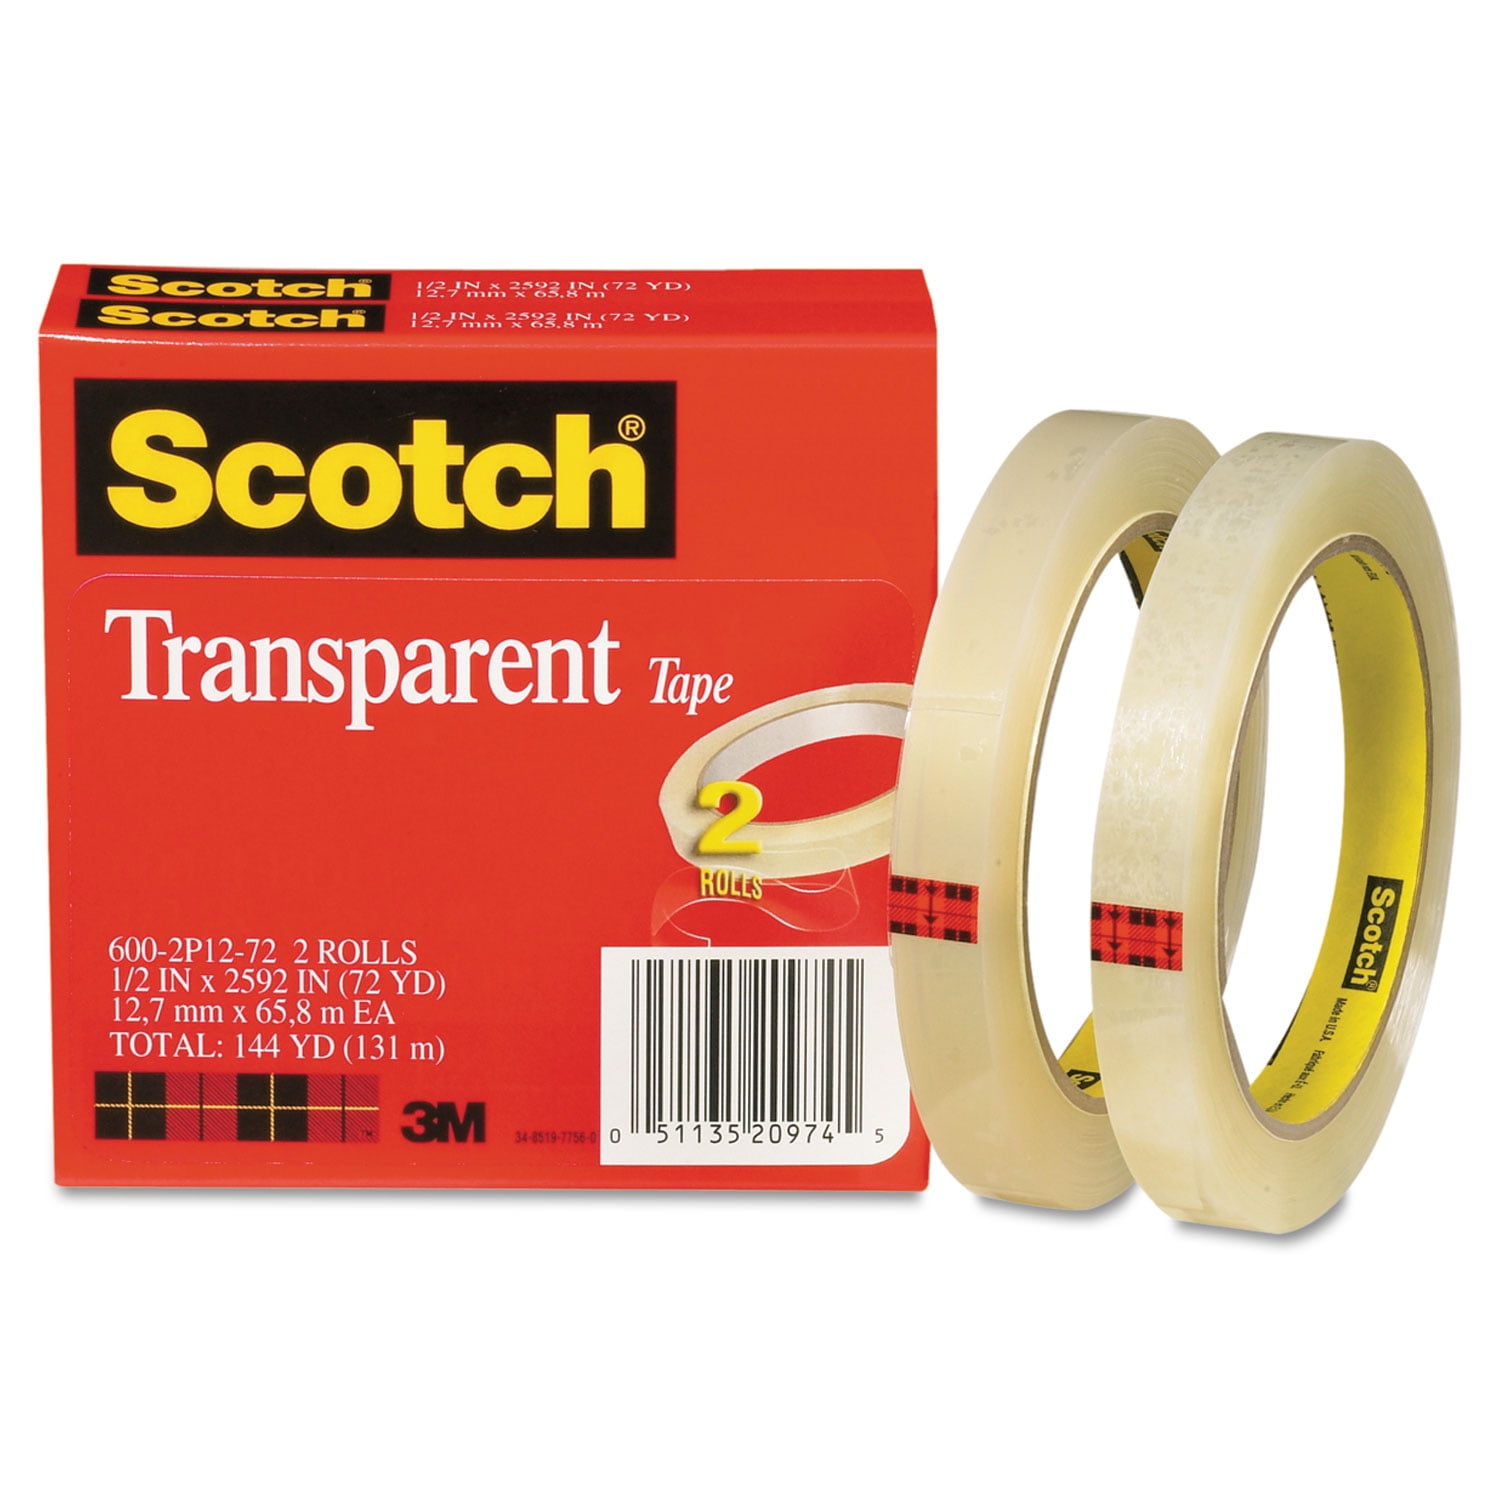 Scotch 3M™ 9425 Removable Double Sided Film Tape, 1/2 x 72 yds, Clear,  18/Case, 3M Stock# 7000048527